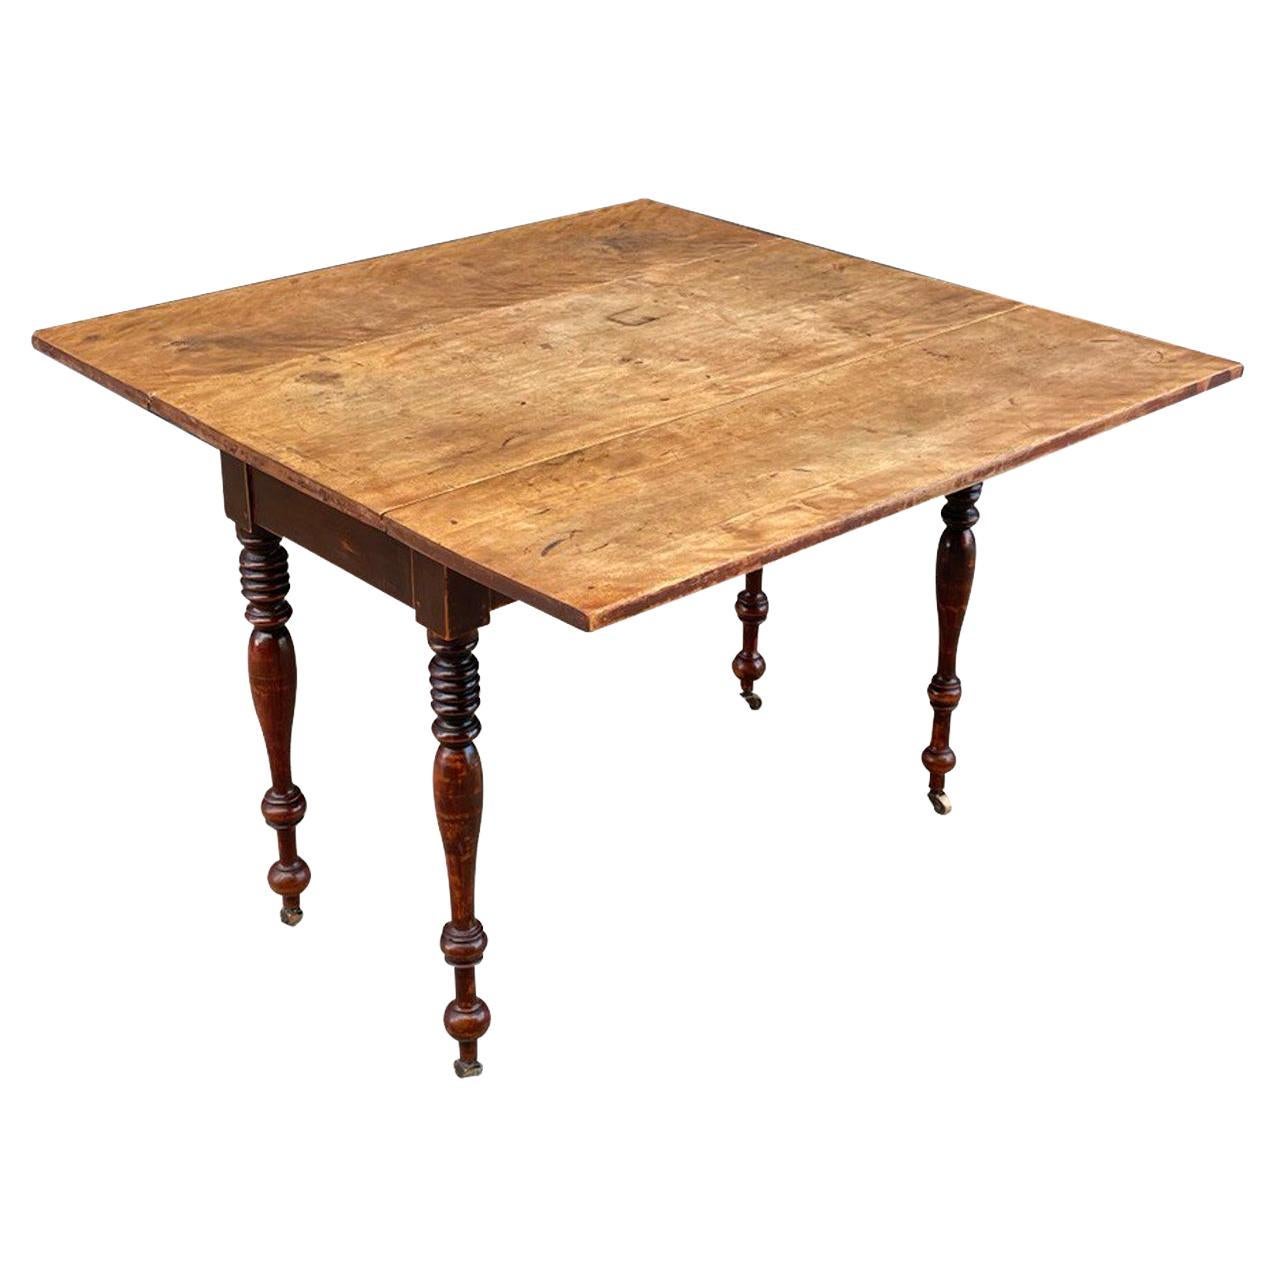 Antique English Farmhouse Country Drop Leaf Dining Table